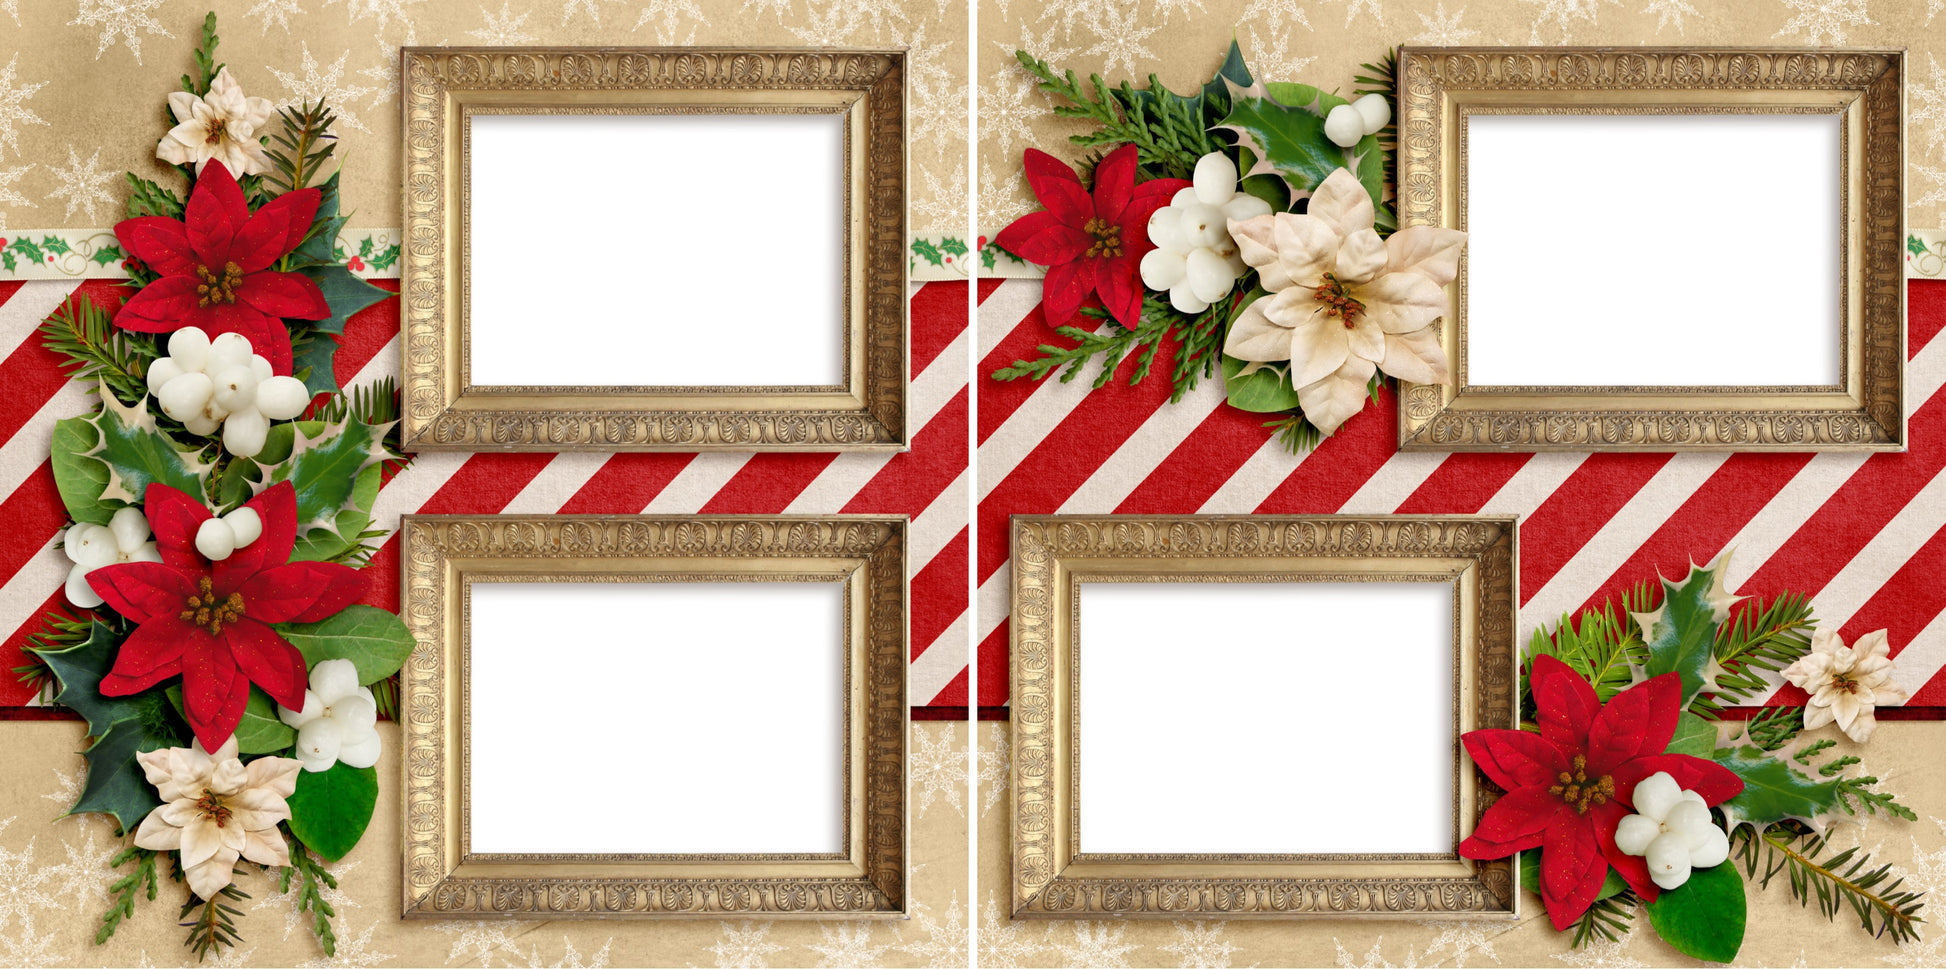 Christmas Holly - Digital Scrapbook Pages - INSTANT DOWNLOAD - EZscrapbooks Scrapbook Layouts Christmas